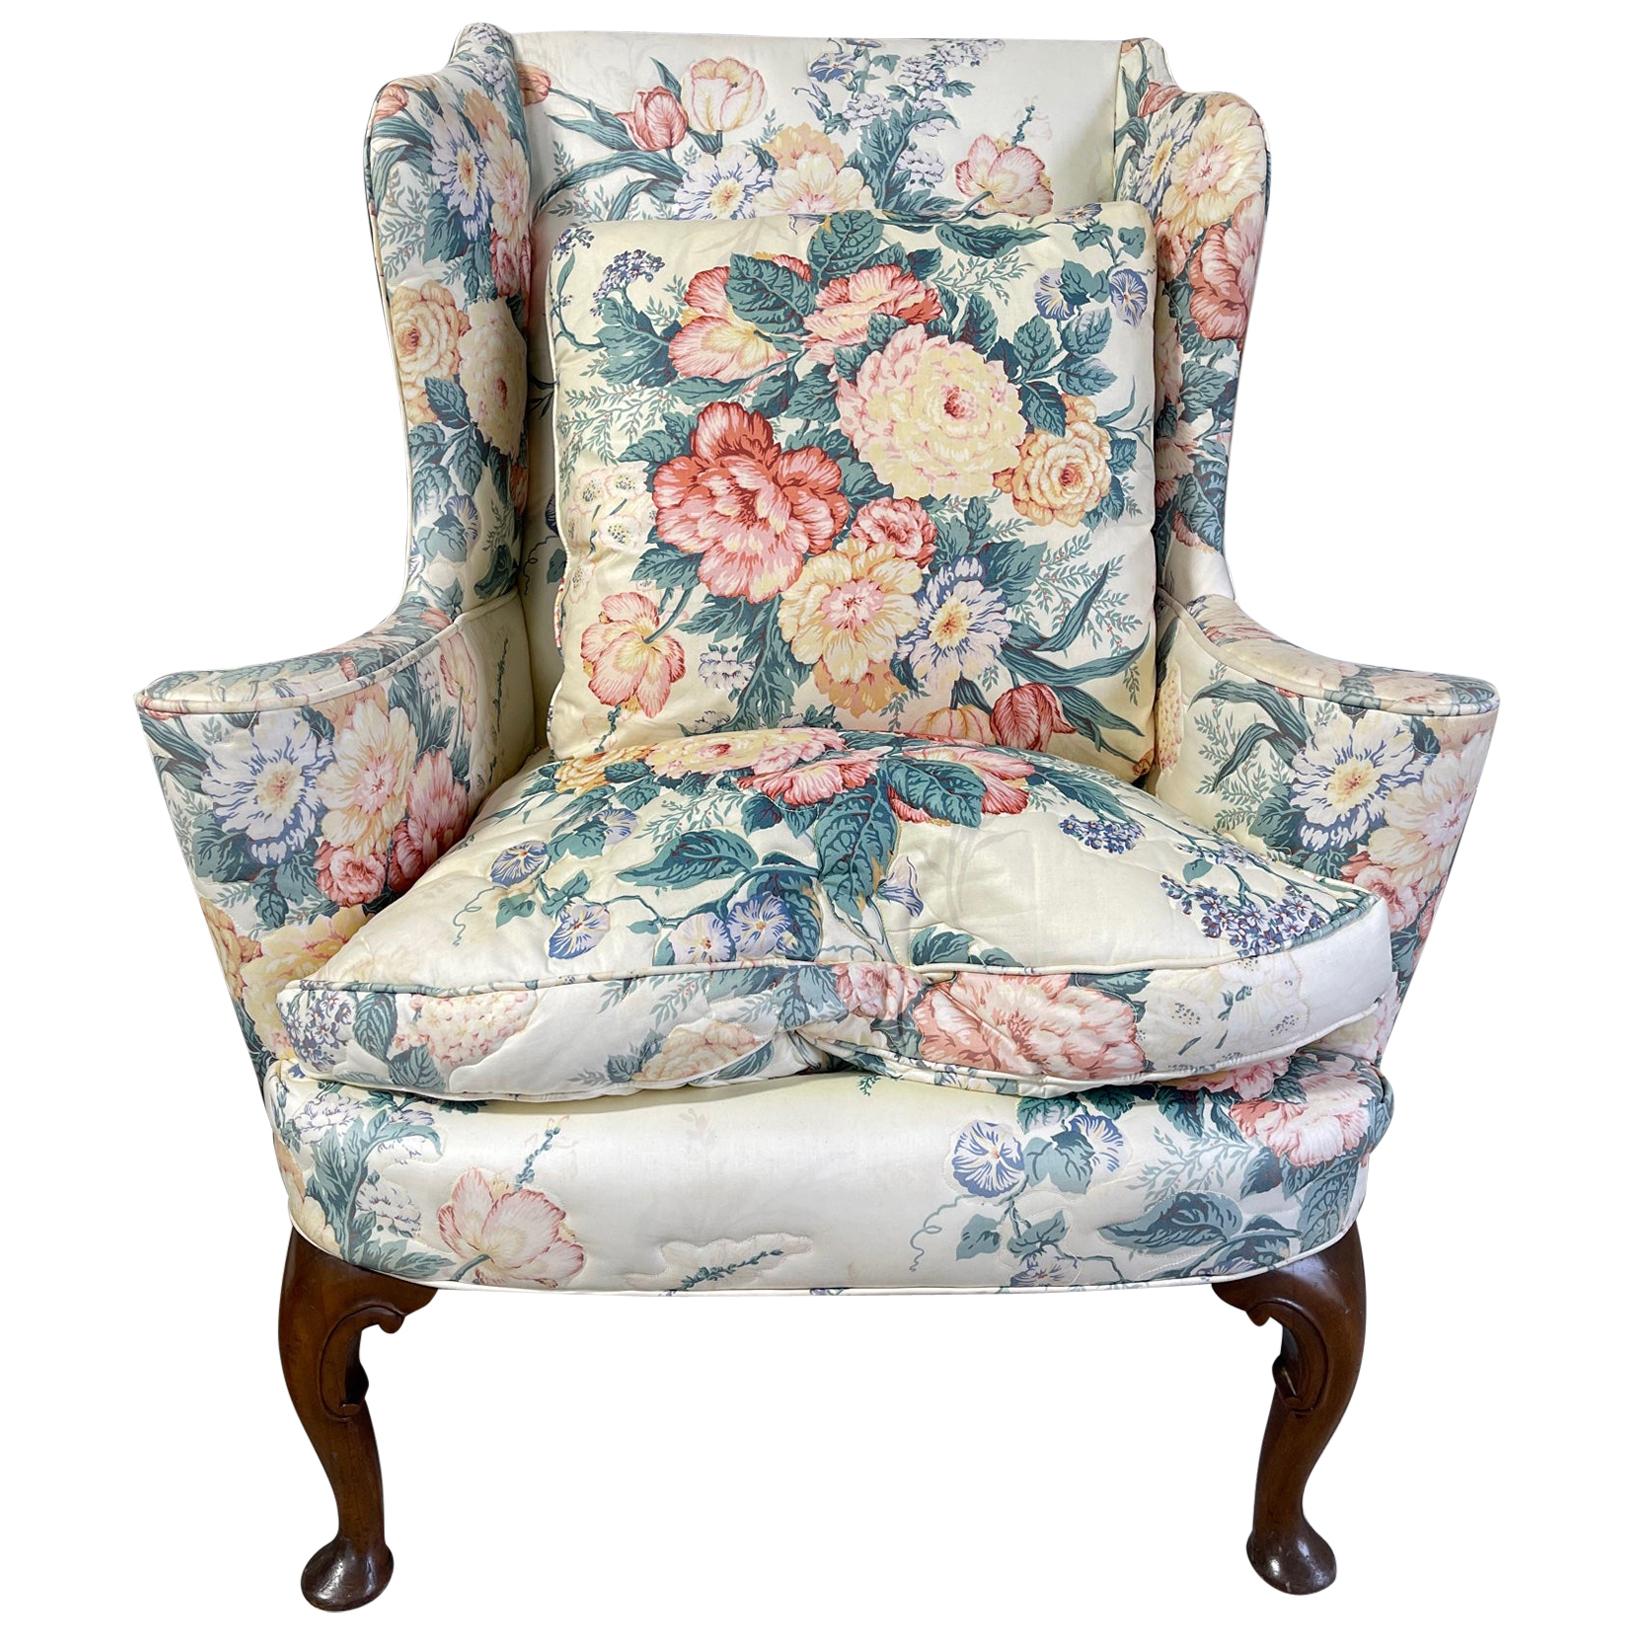 Upholstered Queen Anne Style Wingback Chair with Pad Feet, 20th Century